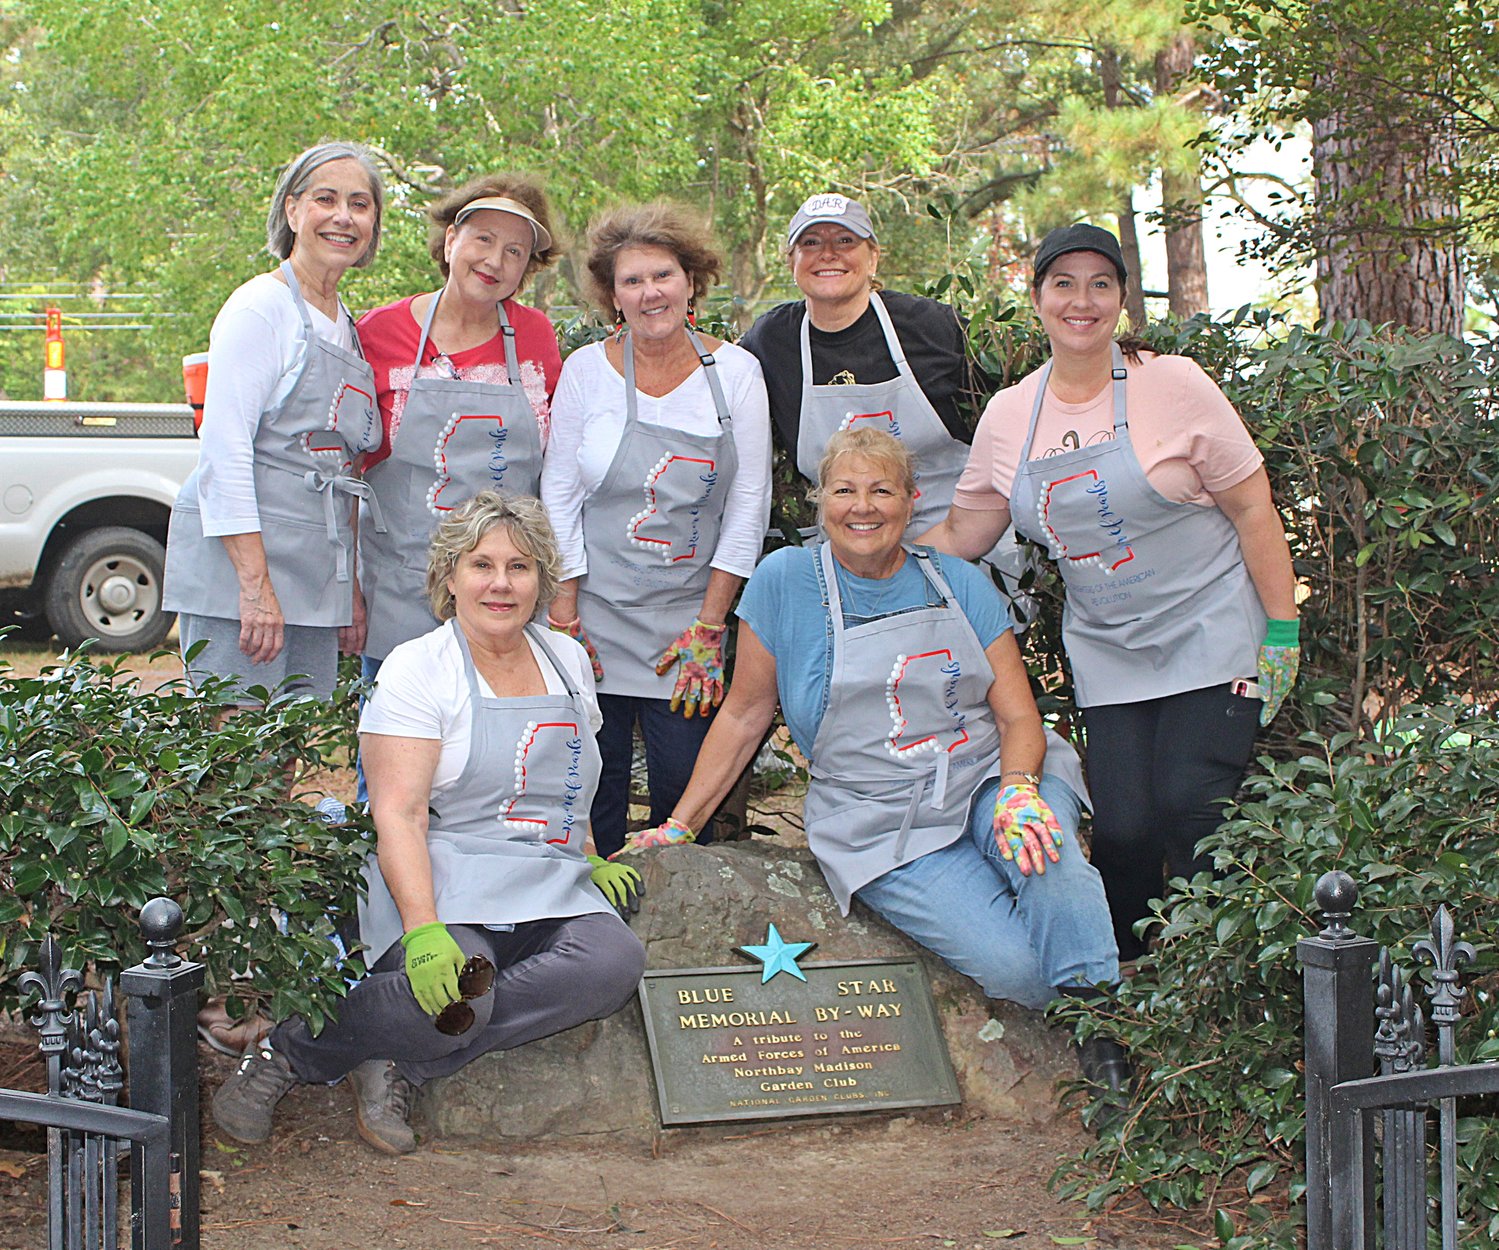 The chapter members, front Marcia Penn, Donna Russell, back row Sally Patterson, Amy Palmer, Chapter Regent Kay Ewing, Saundra Dewey and Shellye Barnes, joined with the Madison Parks and Recreation Department and Mayor Mary Hawkins Butler in the project.